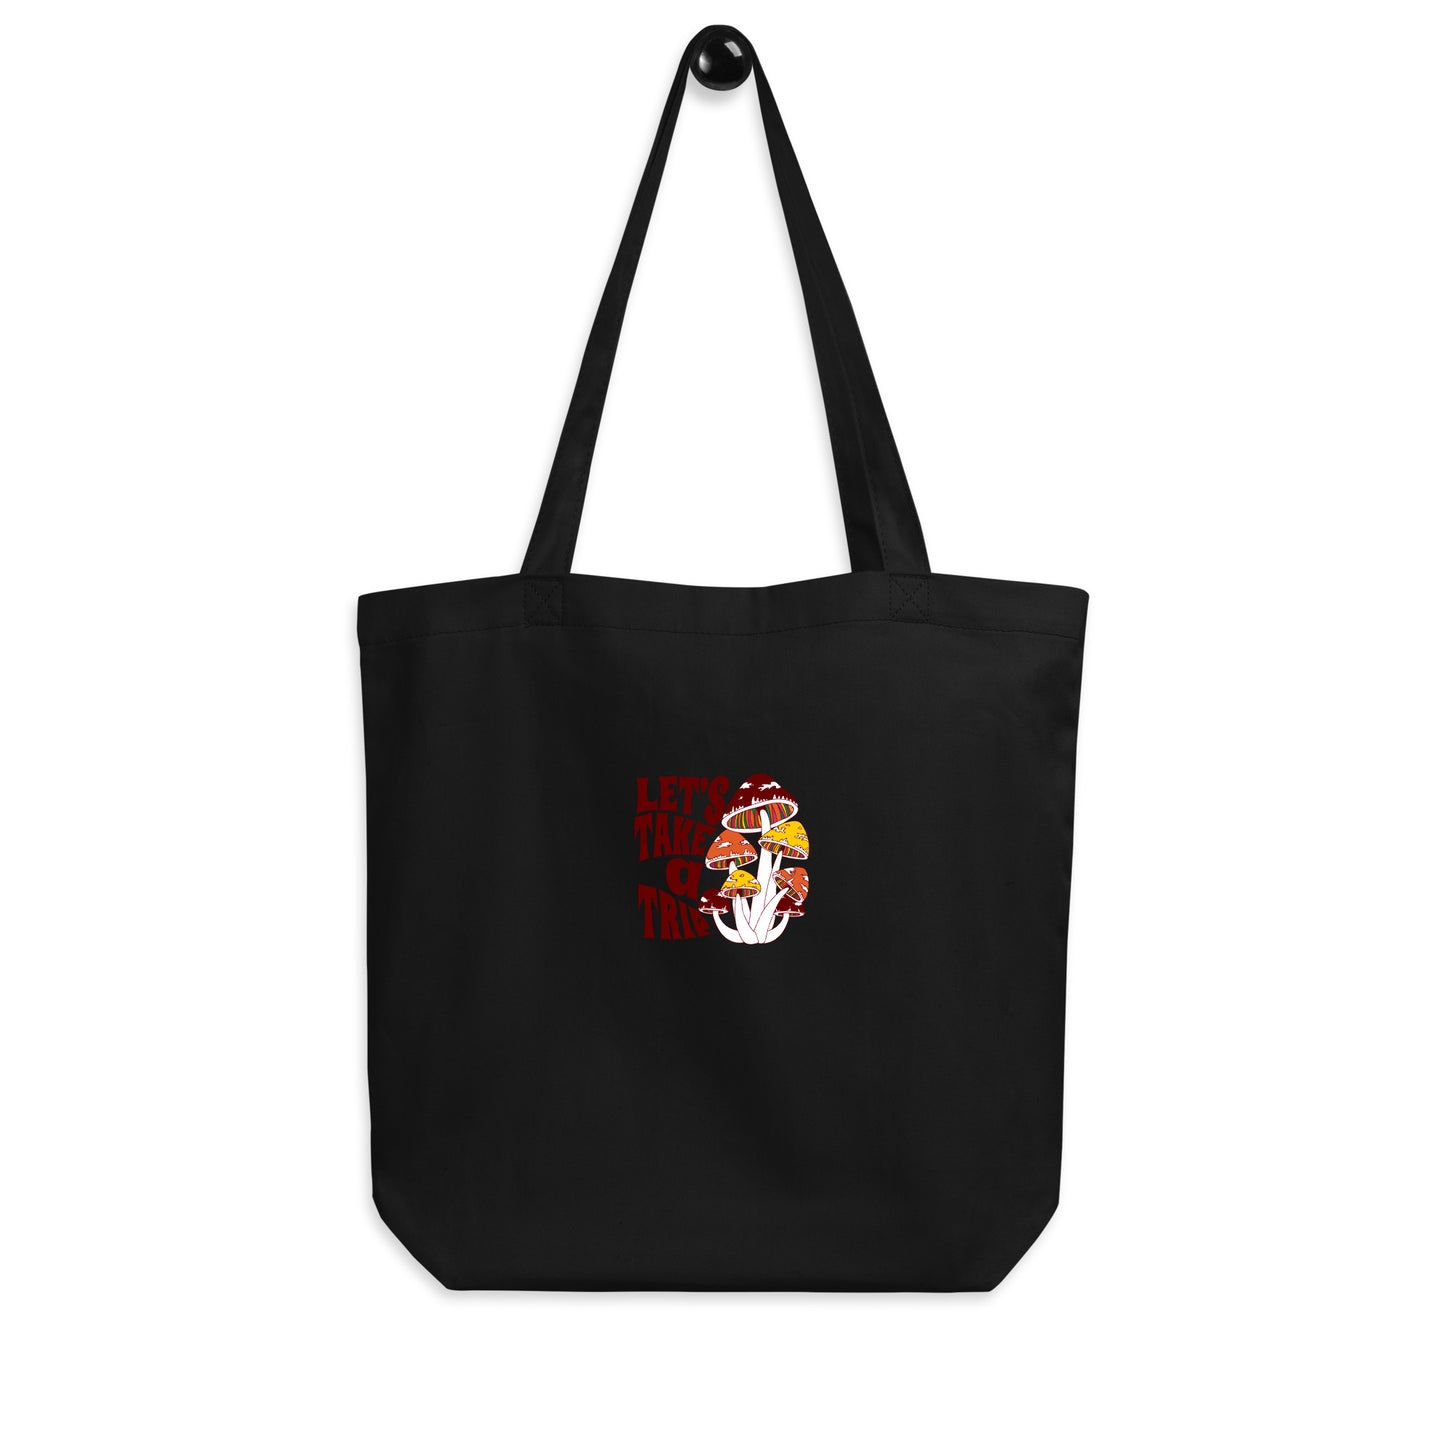 Enticing Trip Embroidery Eco Tote Bag